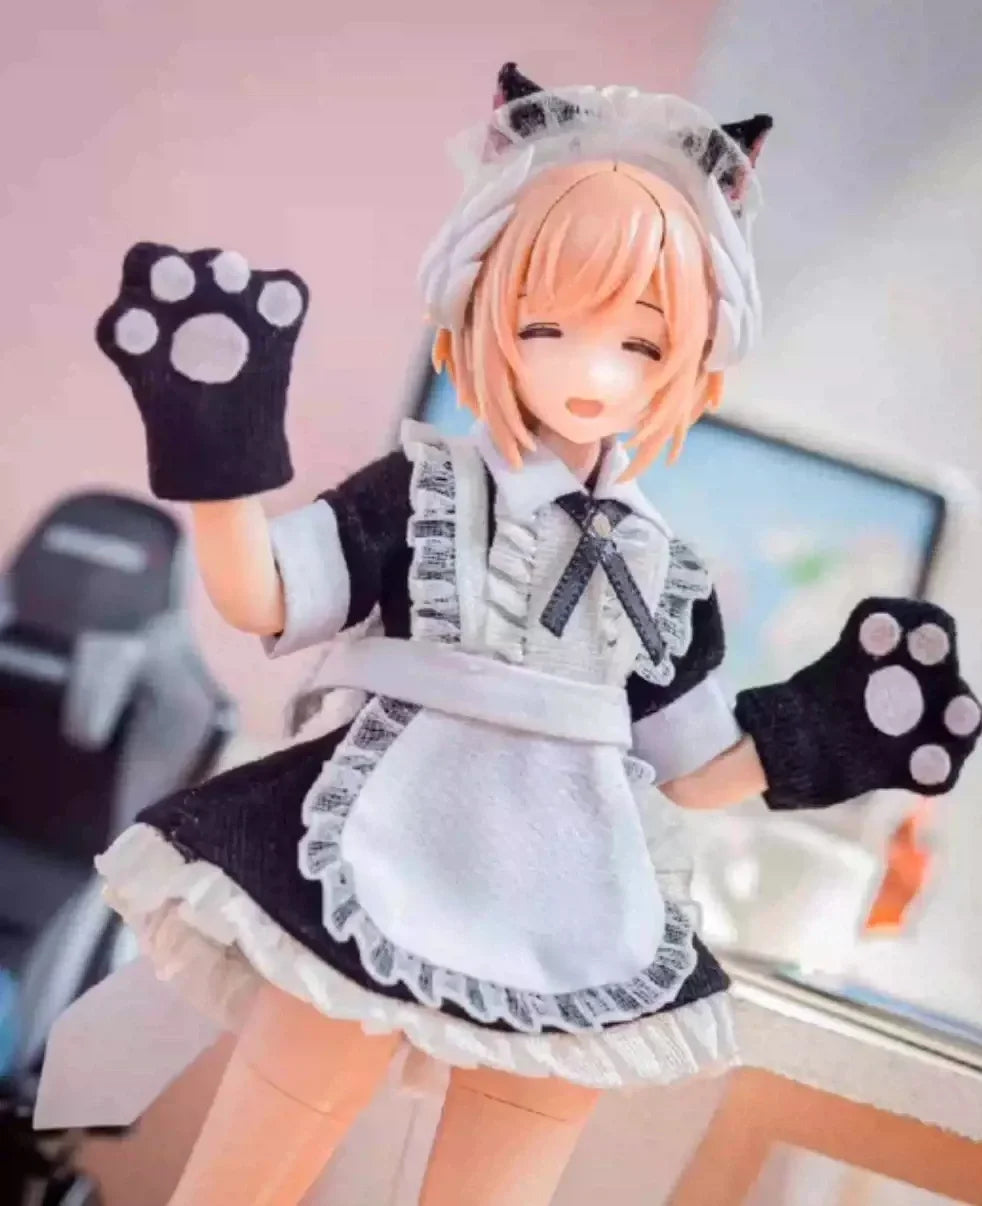 6" Anime Girl Action Figure Cat Maid Clothing Sets 1/12 Scale